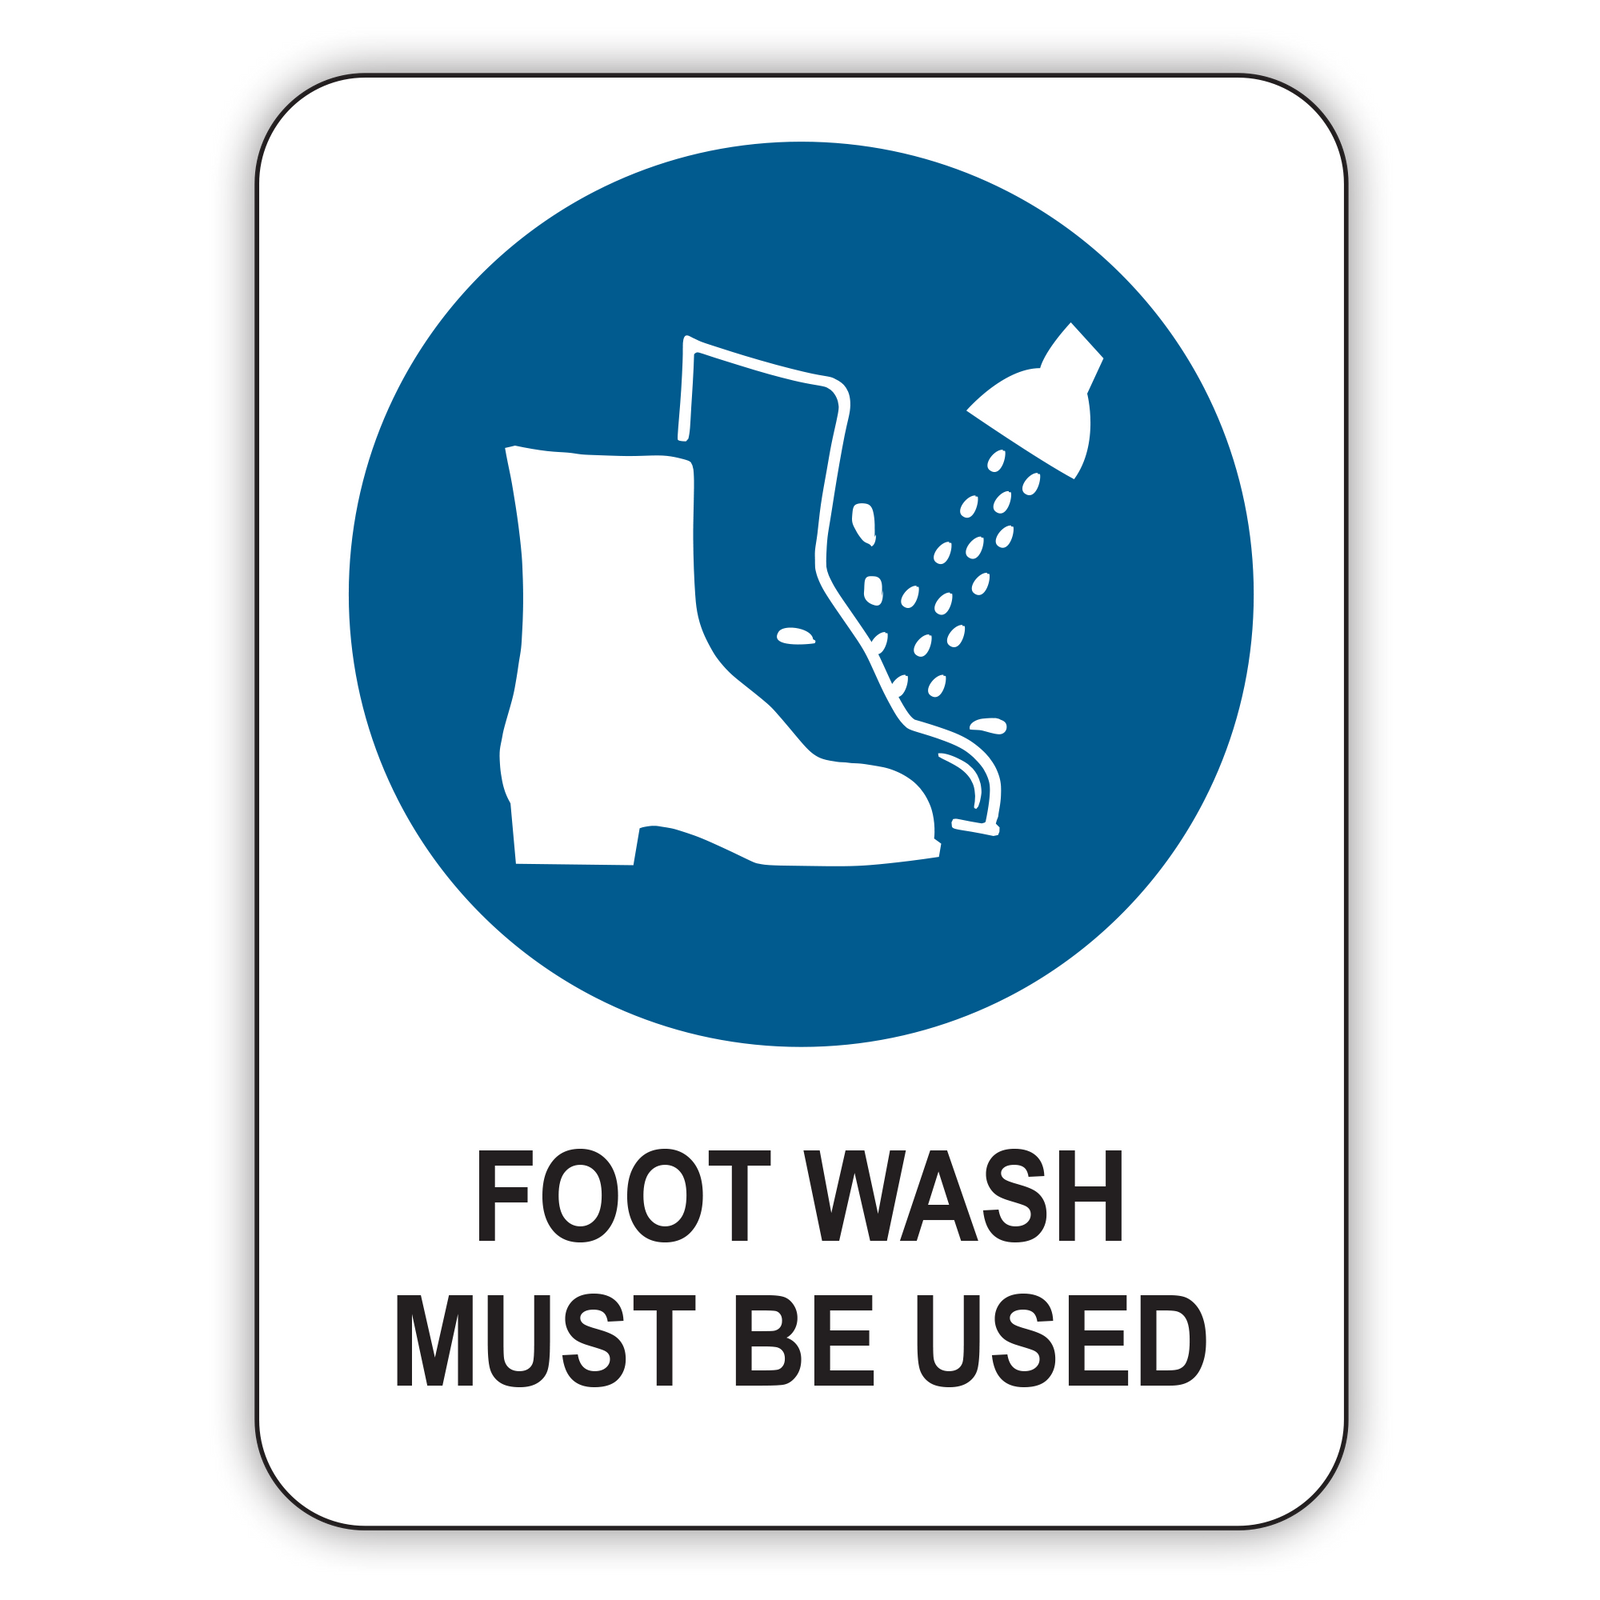 FOOT WASH MUST BE USED SIGNS Size 1 Safety Signs Australia